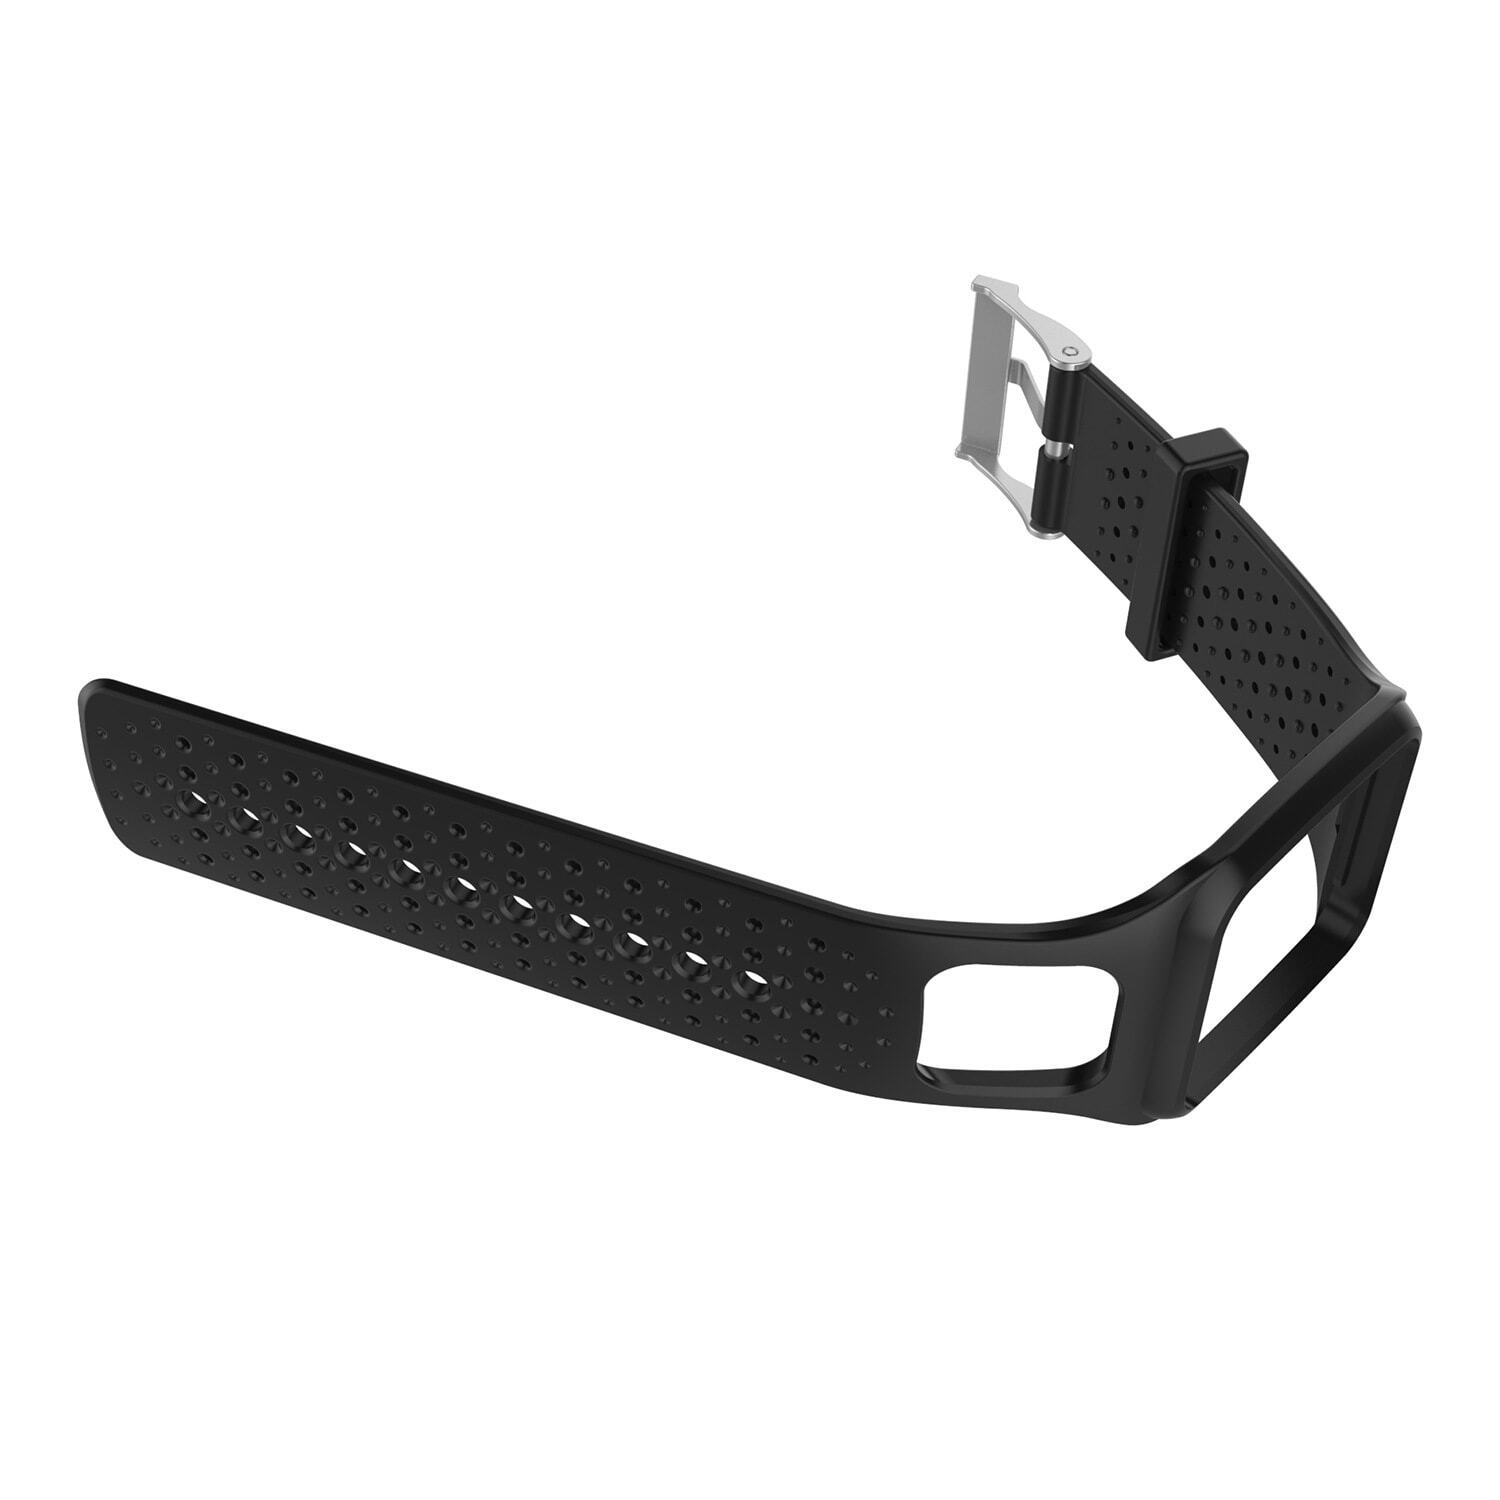 day deo silicon tomtom runner 4 Dây đeo đồng hồ Tomtom strap silicon (dành cho TomTom Runner / Multisports) - YCB.vn